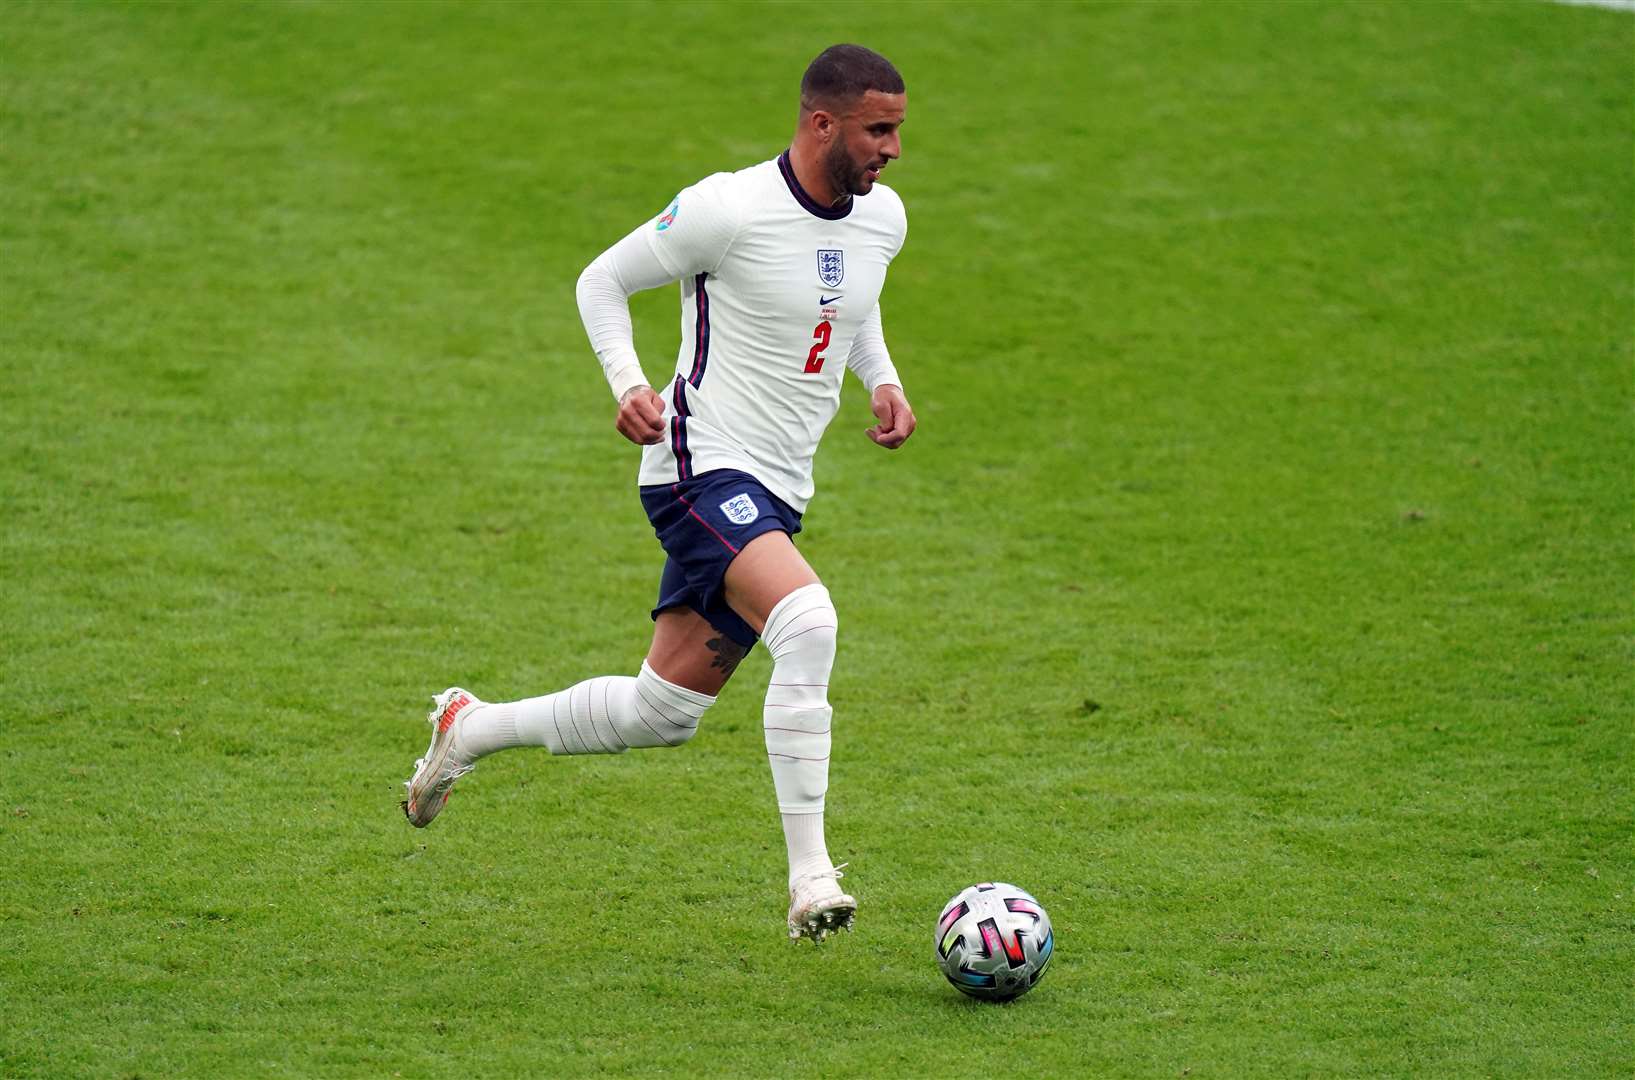 England’s Kyle Walker on the ball at Wembley (Mike Egerton/PA)